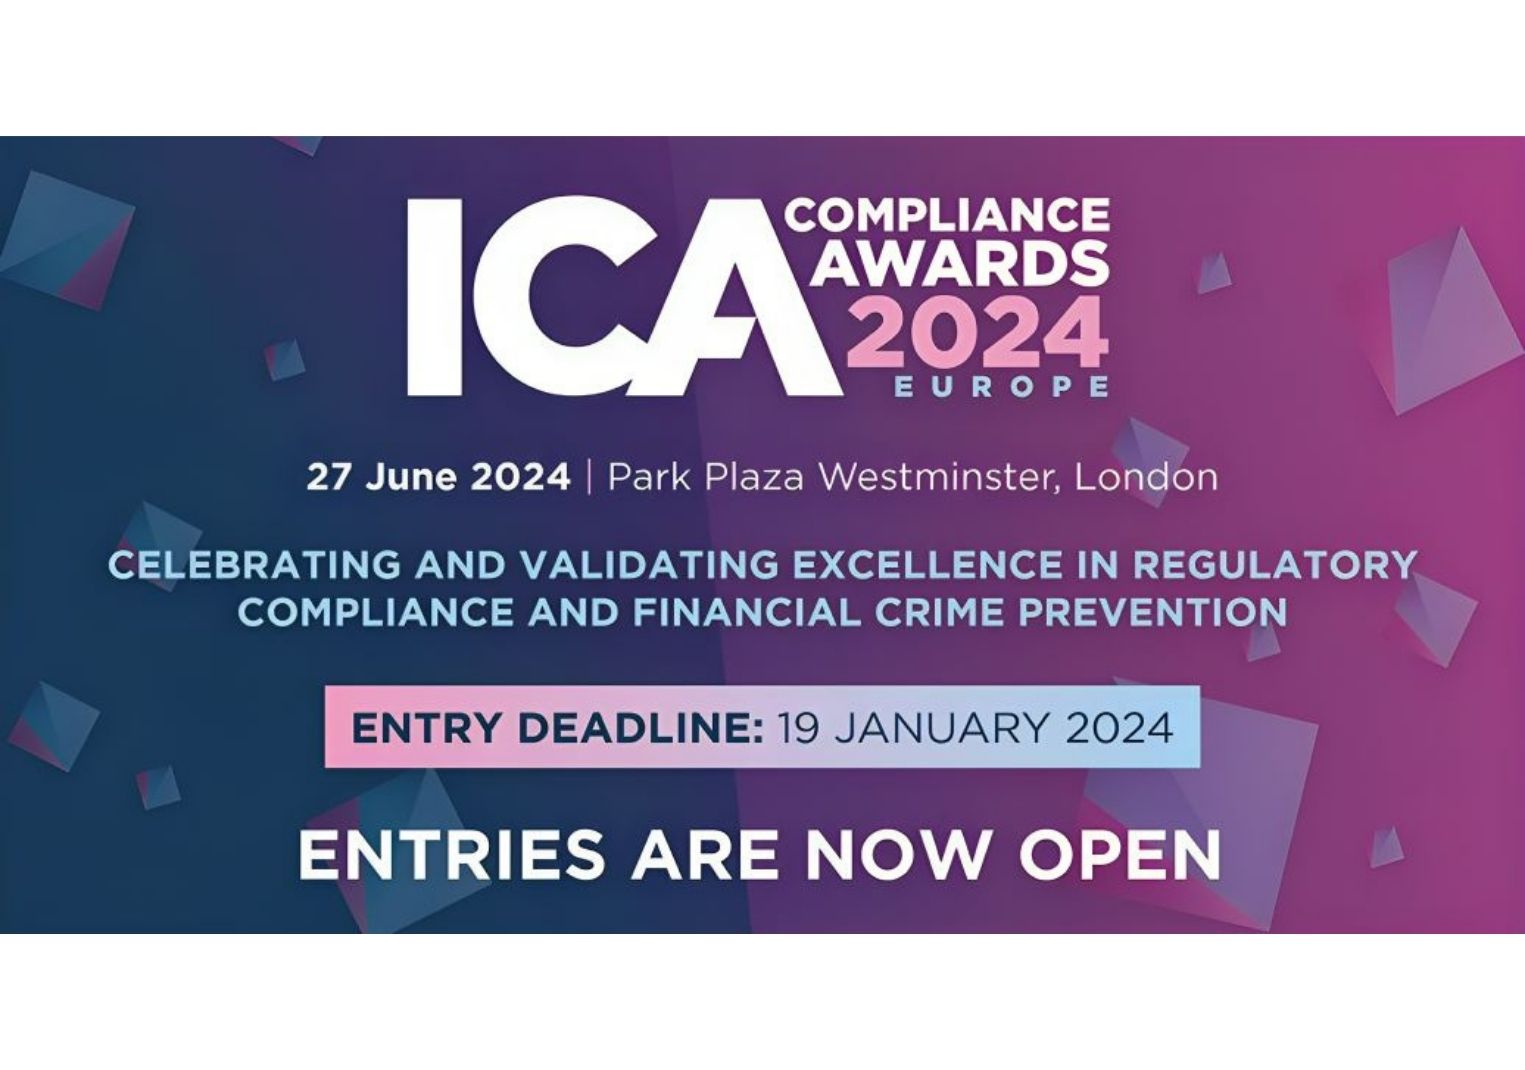 The ICA Compliance Awards return for 2024